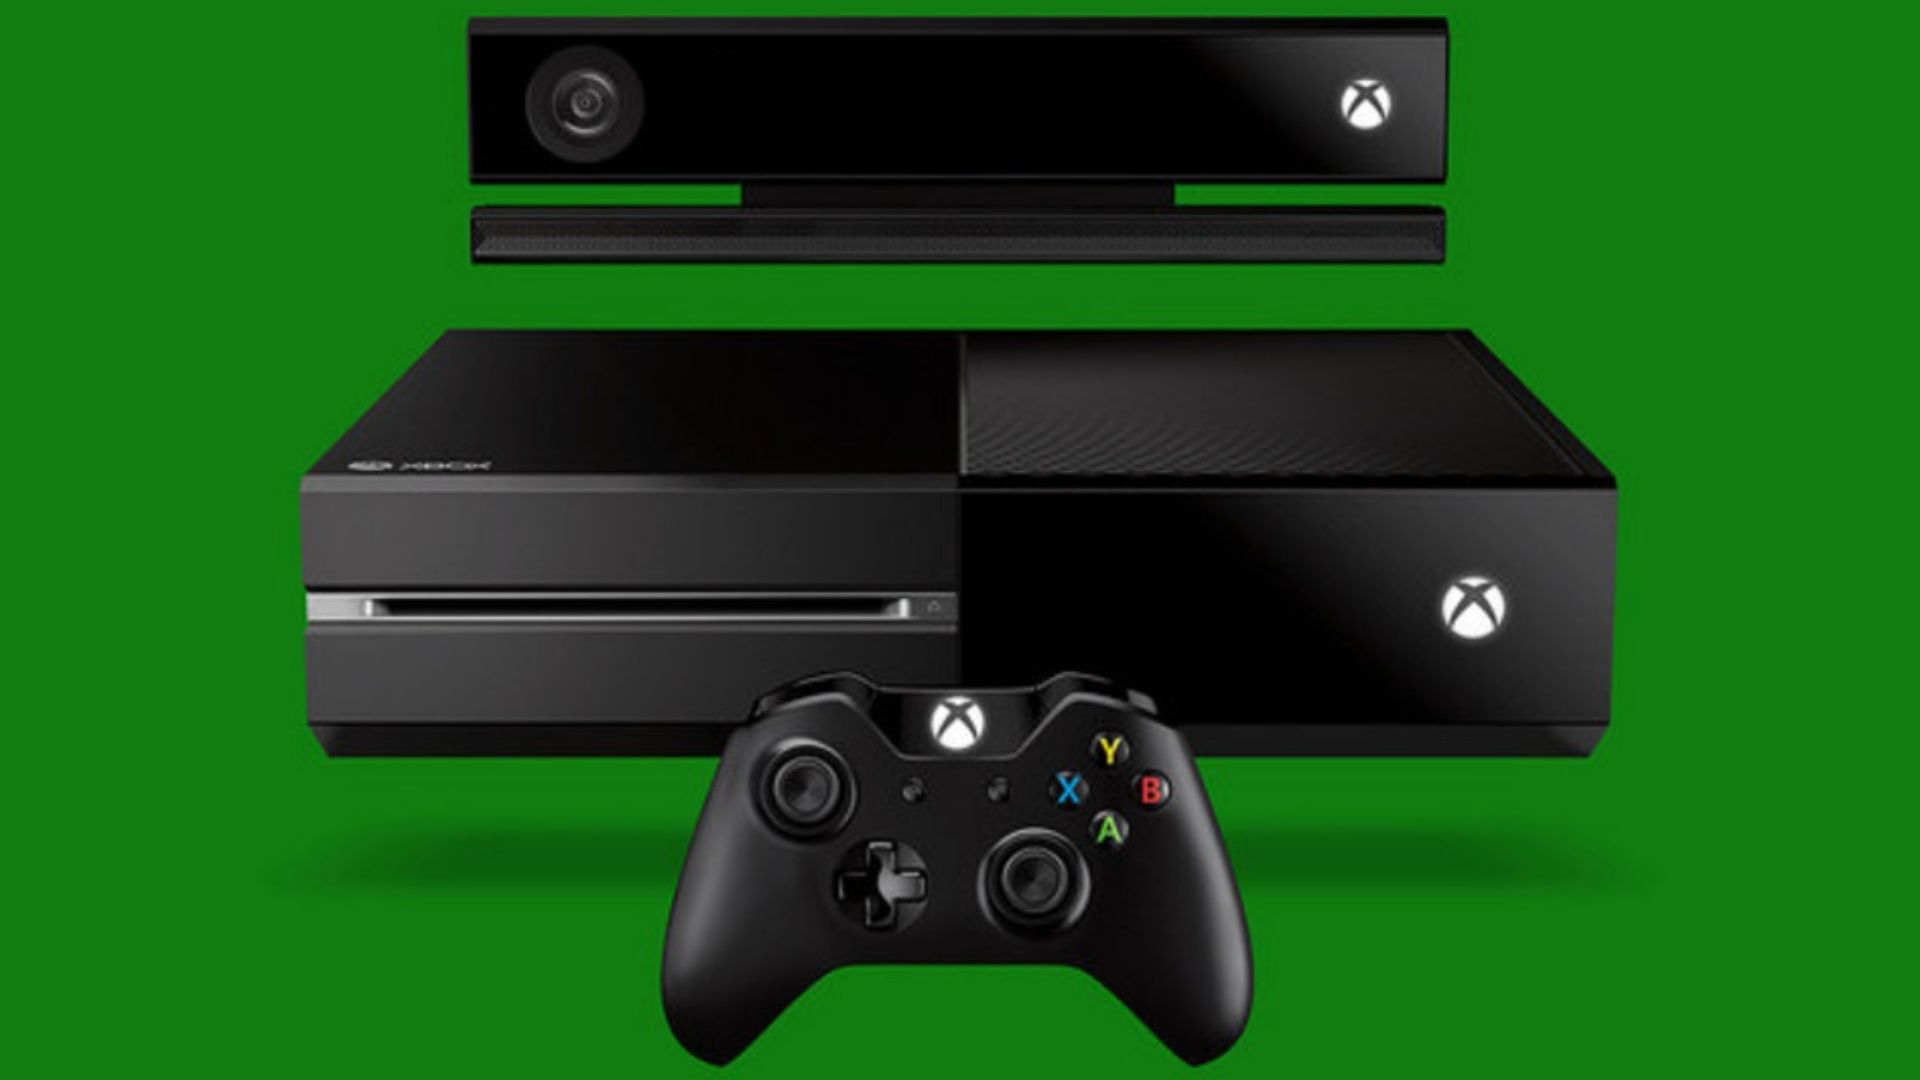 The Kinect bundled with the original Xbox One